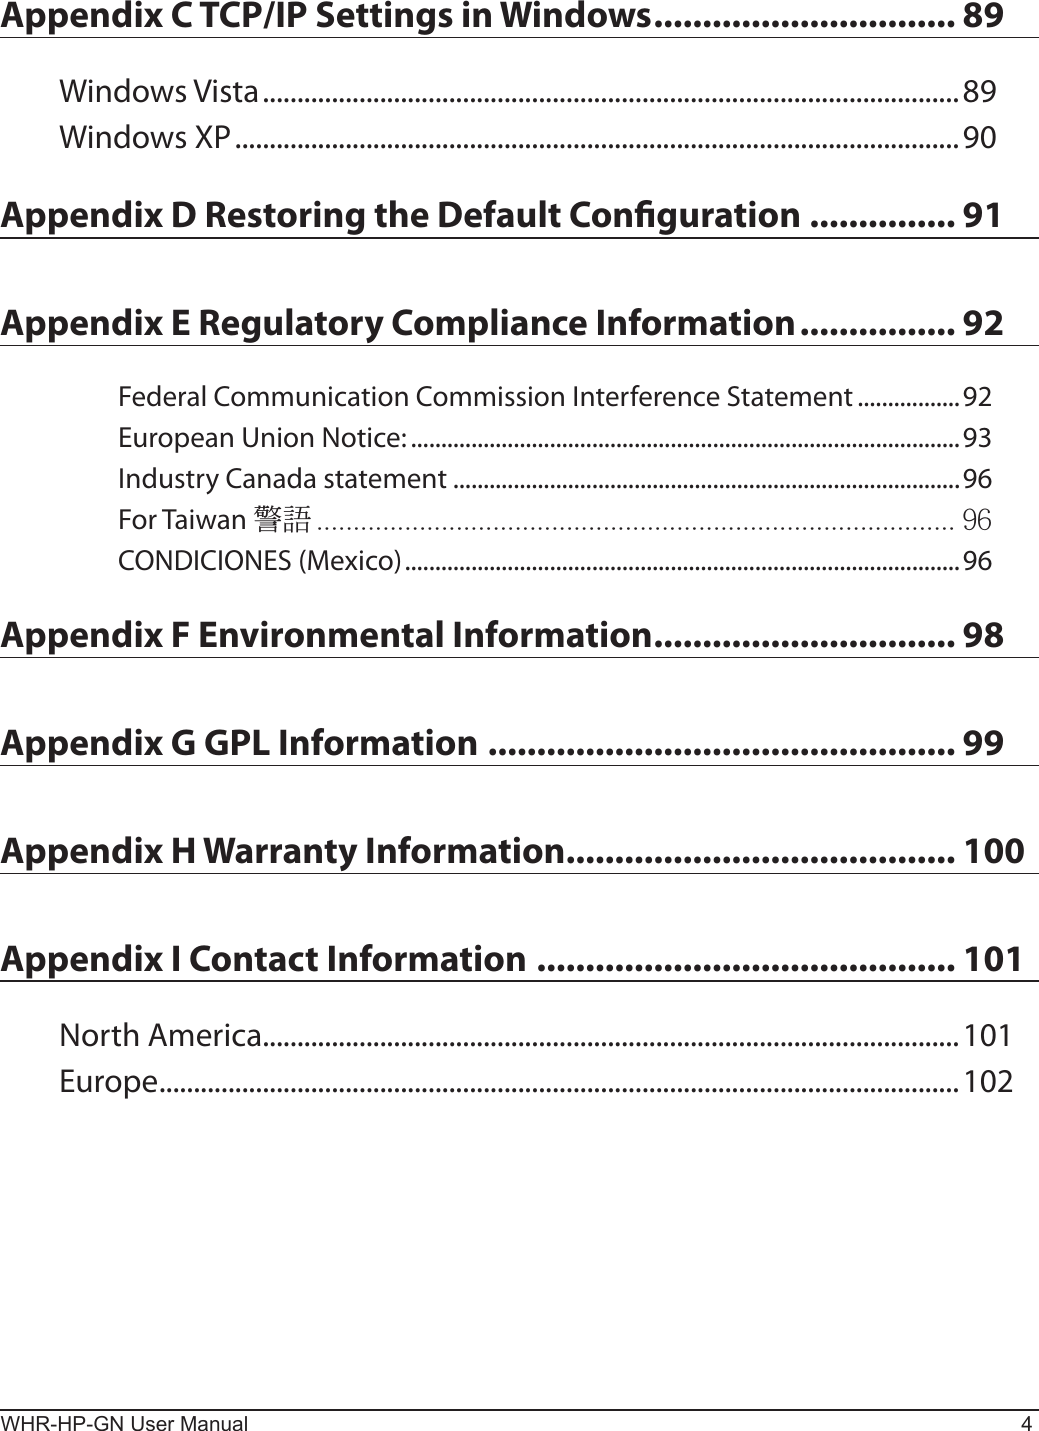 WHR-HP-GN User Manual 4Appendix C TCP/IP Settings in Windows ............................... 89Windows Vista .....................................................................................................89Windows XP .........................................................................................................90Appendix D Restoring the Default Conguration ............... 91Appendix E Regulatory Compliance Information ................ 92Federal Communication Commission Interference Statement .................92European Union Notice: ...........................................................................................93Industry Canada statement ....................................................................................96For Taiwan  CONDICIONES (Mexico) ............................................................................................96Appendix F Environmental Information ............................... 98Appendix G GPL Information ................................................ 99Appendix H Warranty Information........................................ 100Appendix I Contact Information ........................................... 101North America.....................................................................................................101Europe ....................................................................................................................102